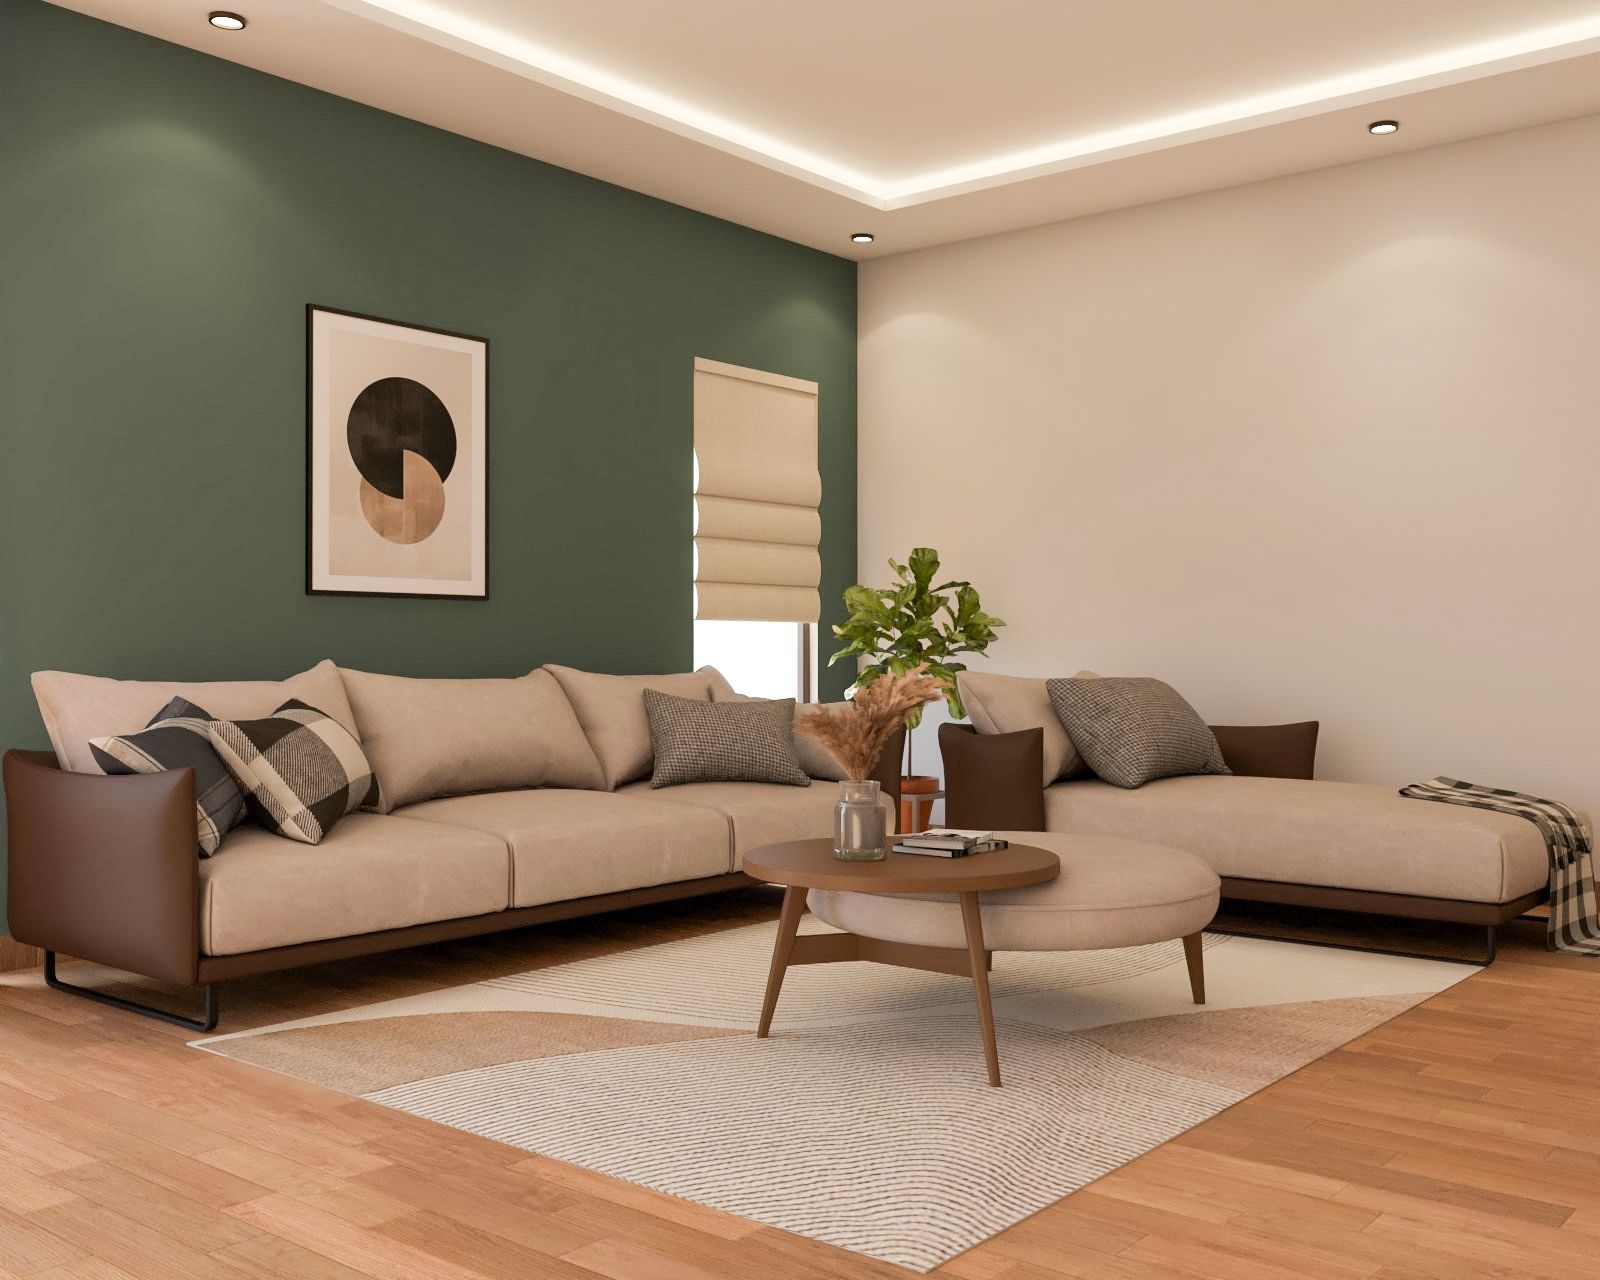 Contemporary Beige And Brown Living Room Design With L-Shaped Sofa Set